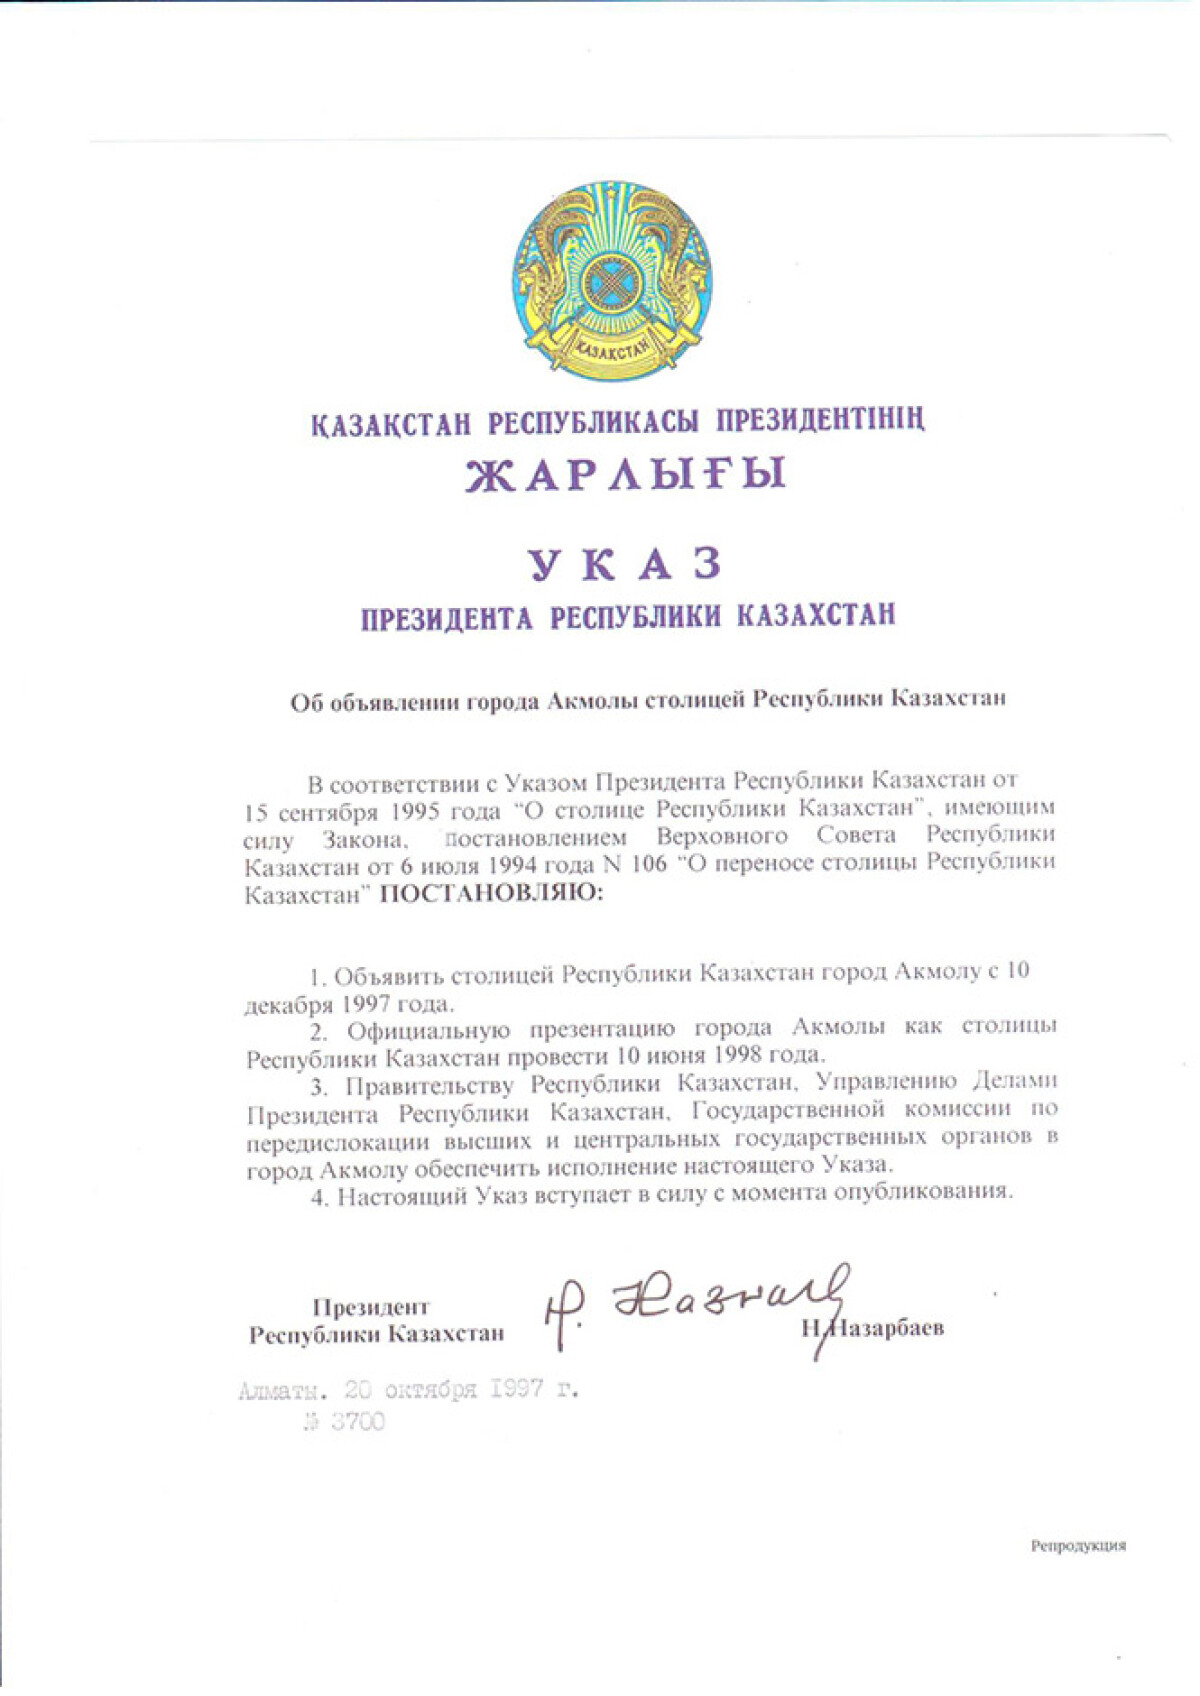 Decree of the President of the Republic of Kazakhstan about declaration Akmola as a capital of Kazakhstan from October 20, 1997 - e-history.kz